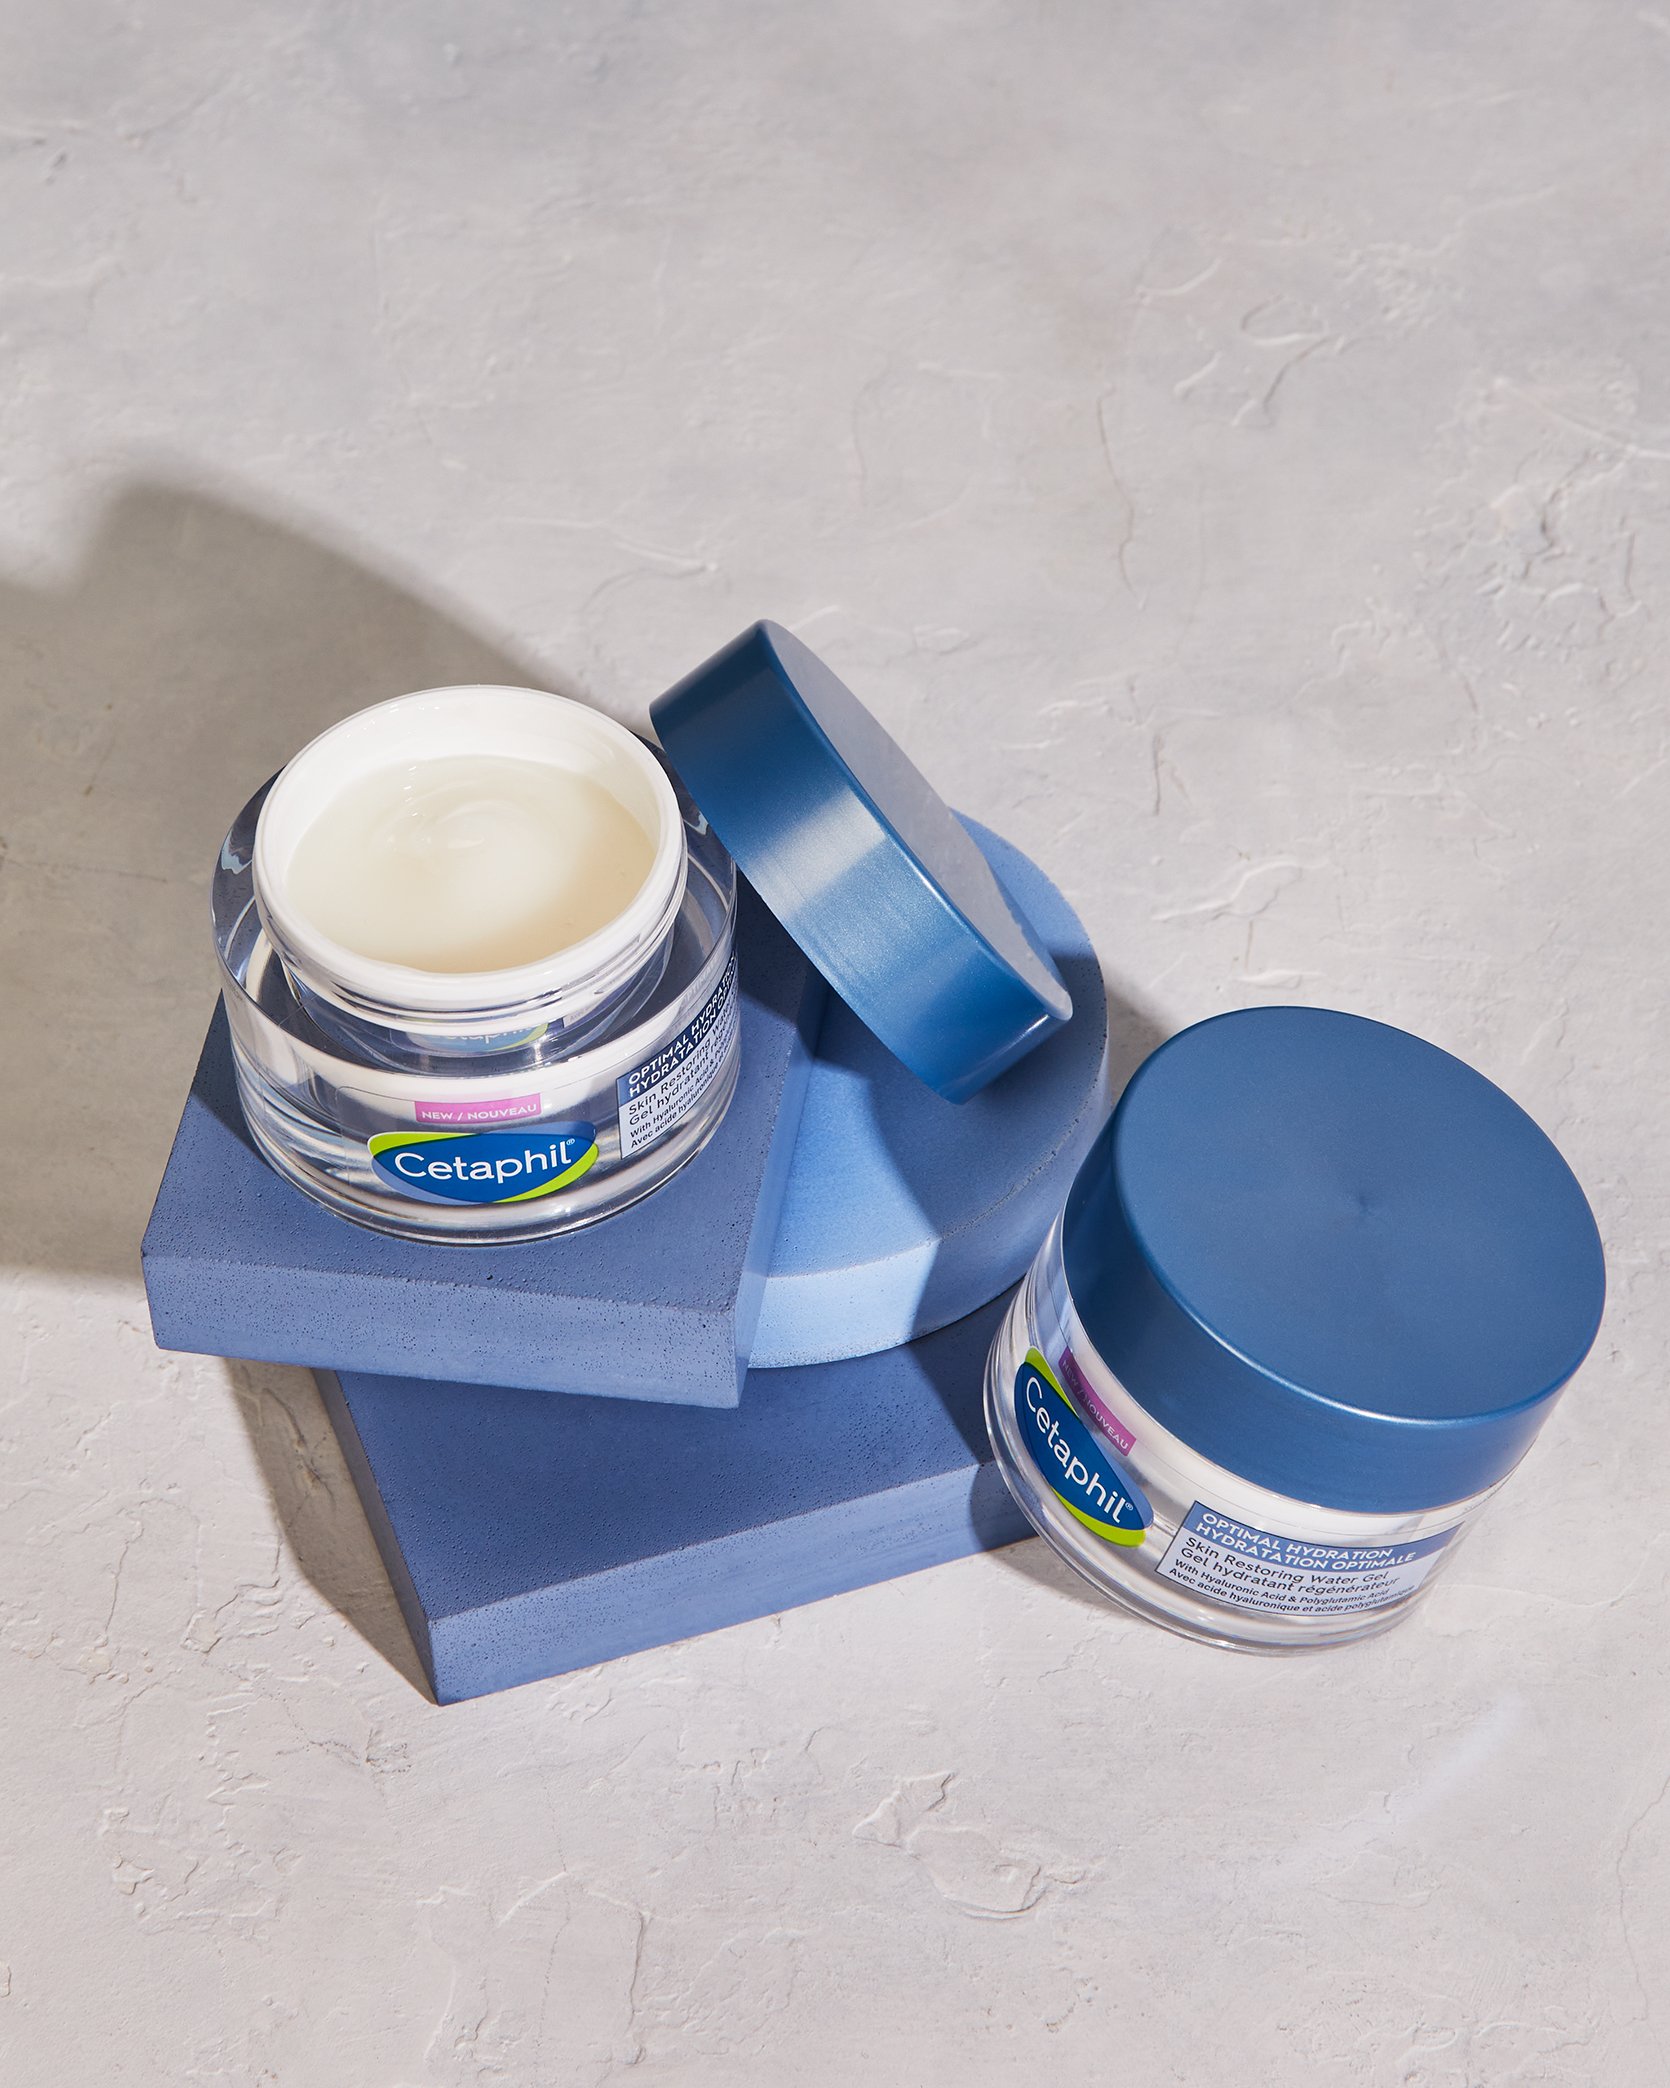  Photographed for  Cetaphil Canada . Styled by  Hina Mistry . 